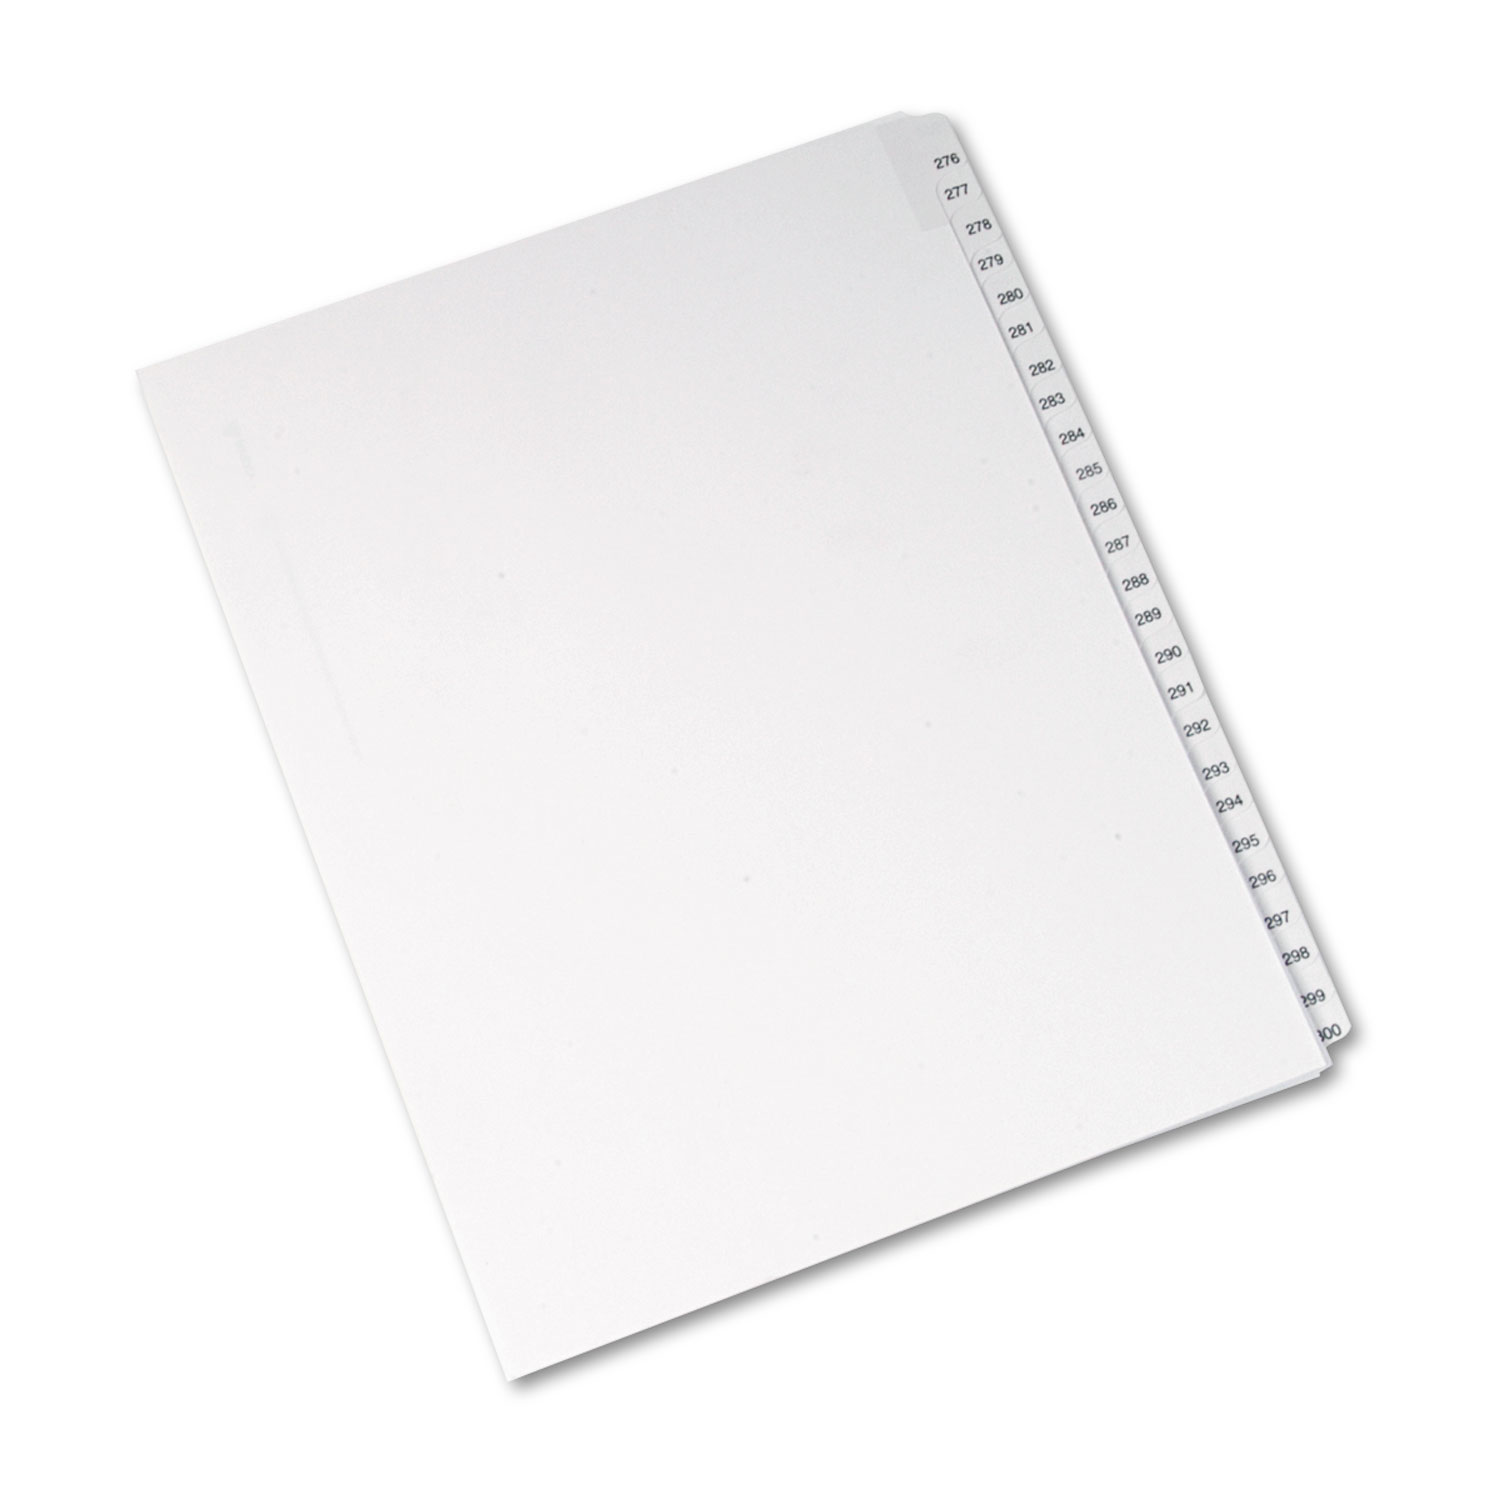  Avery 82194 Preprinted Legal Exhibit Side Tab Index Dividers, Allstate Style, 25-Tab, 276 to 300, 11 x 8.5, White, 1 Set (AVE82194) 